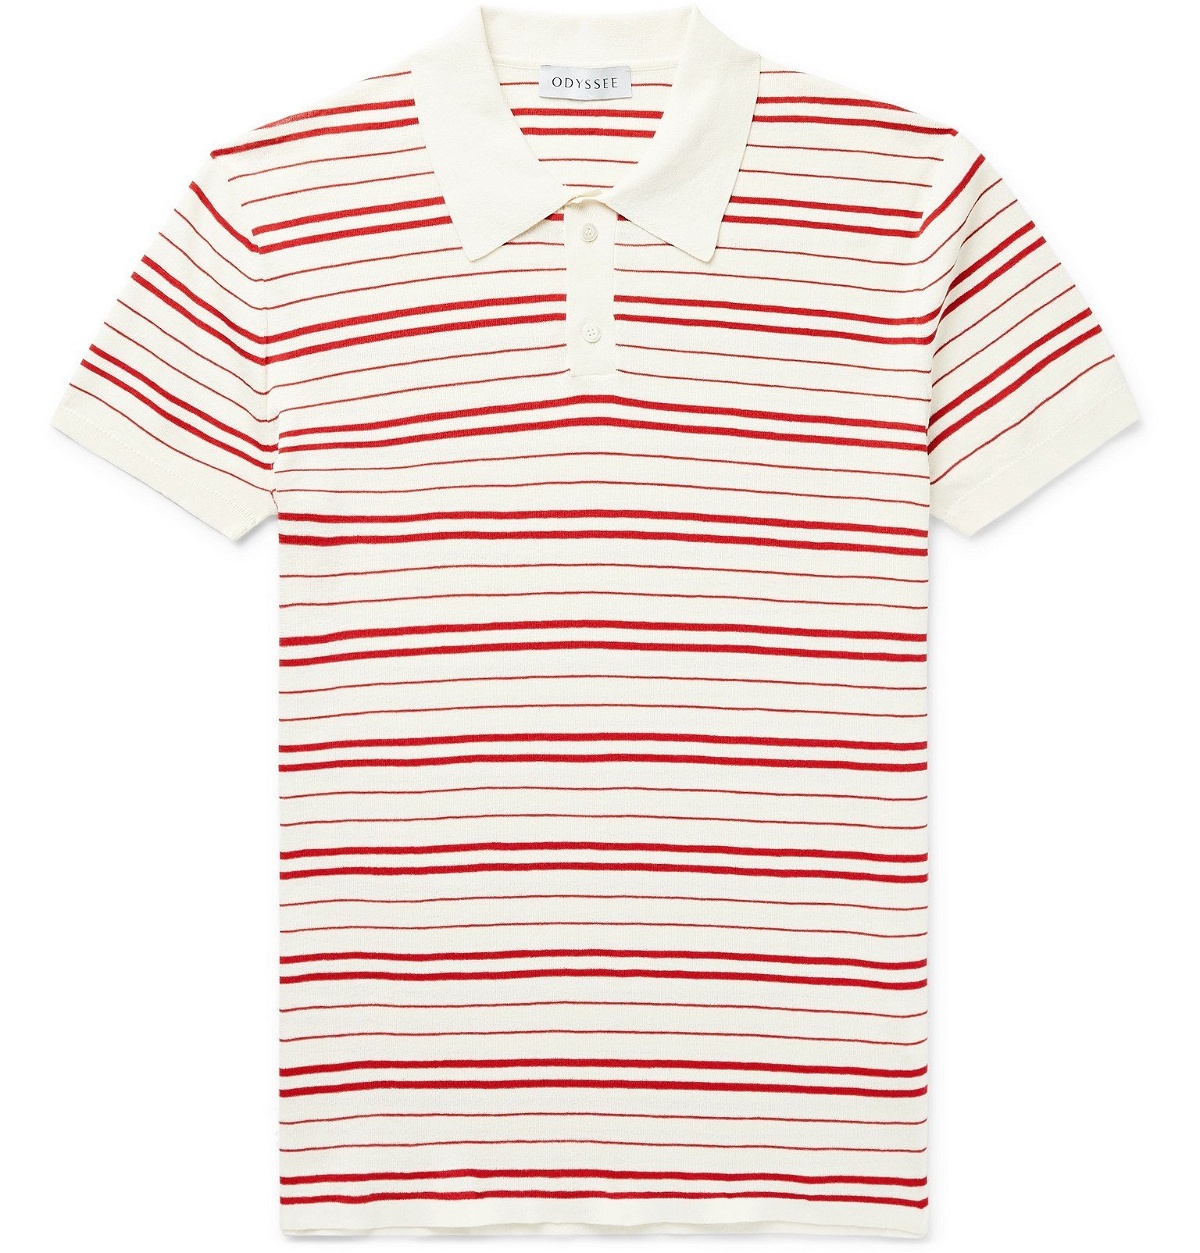 Odyssee - Riker Slim-Fit Striped Cotton Polo Shirt - Red Odyssee